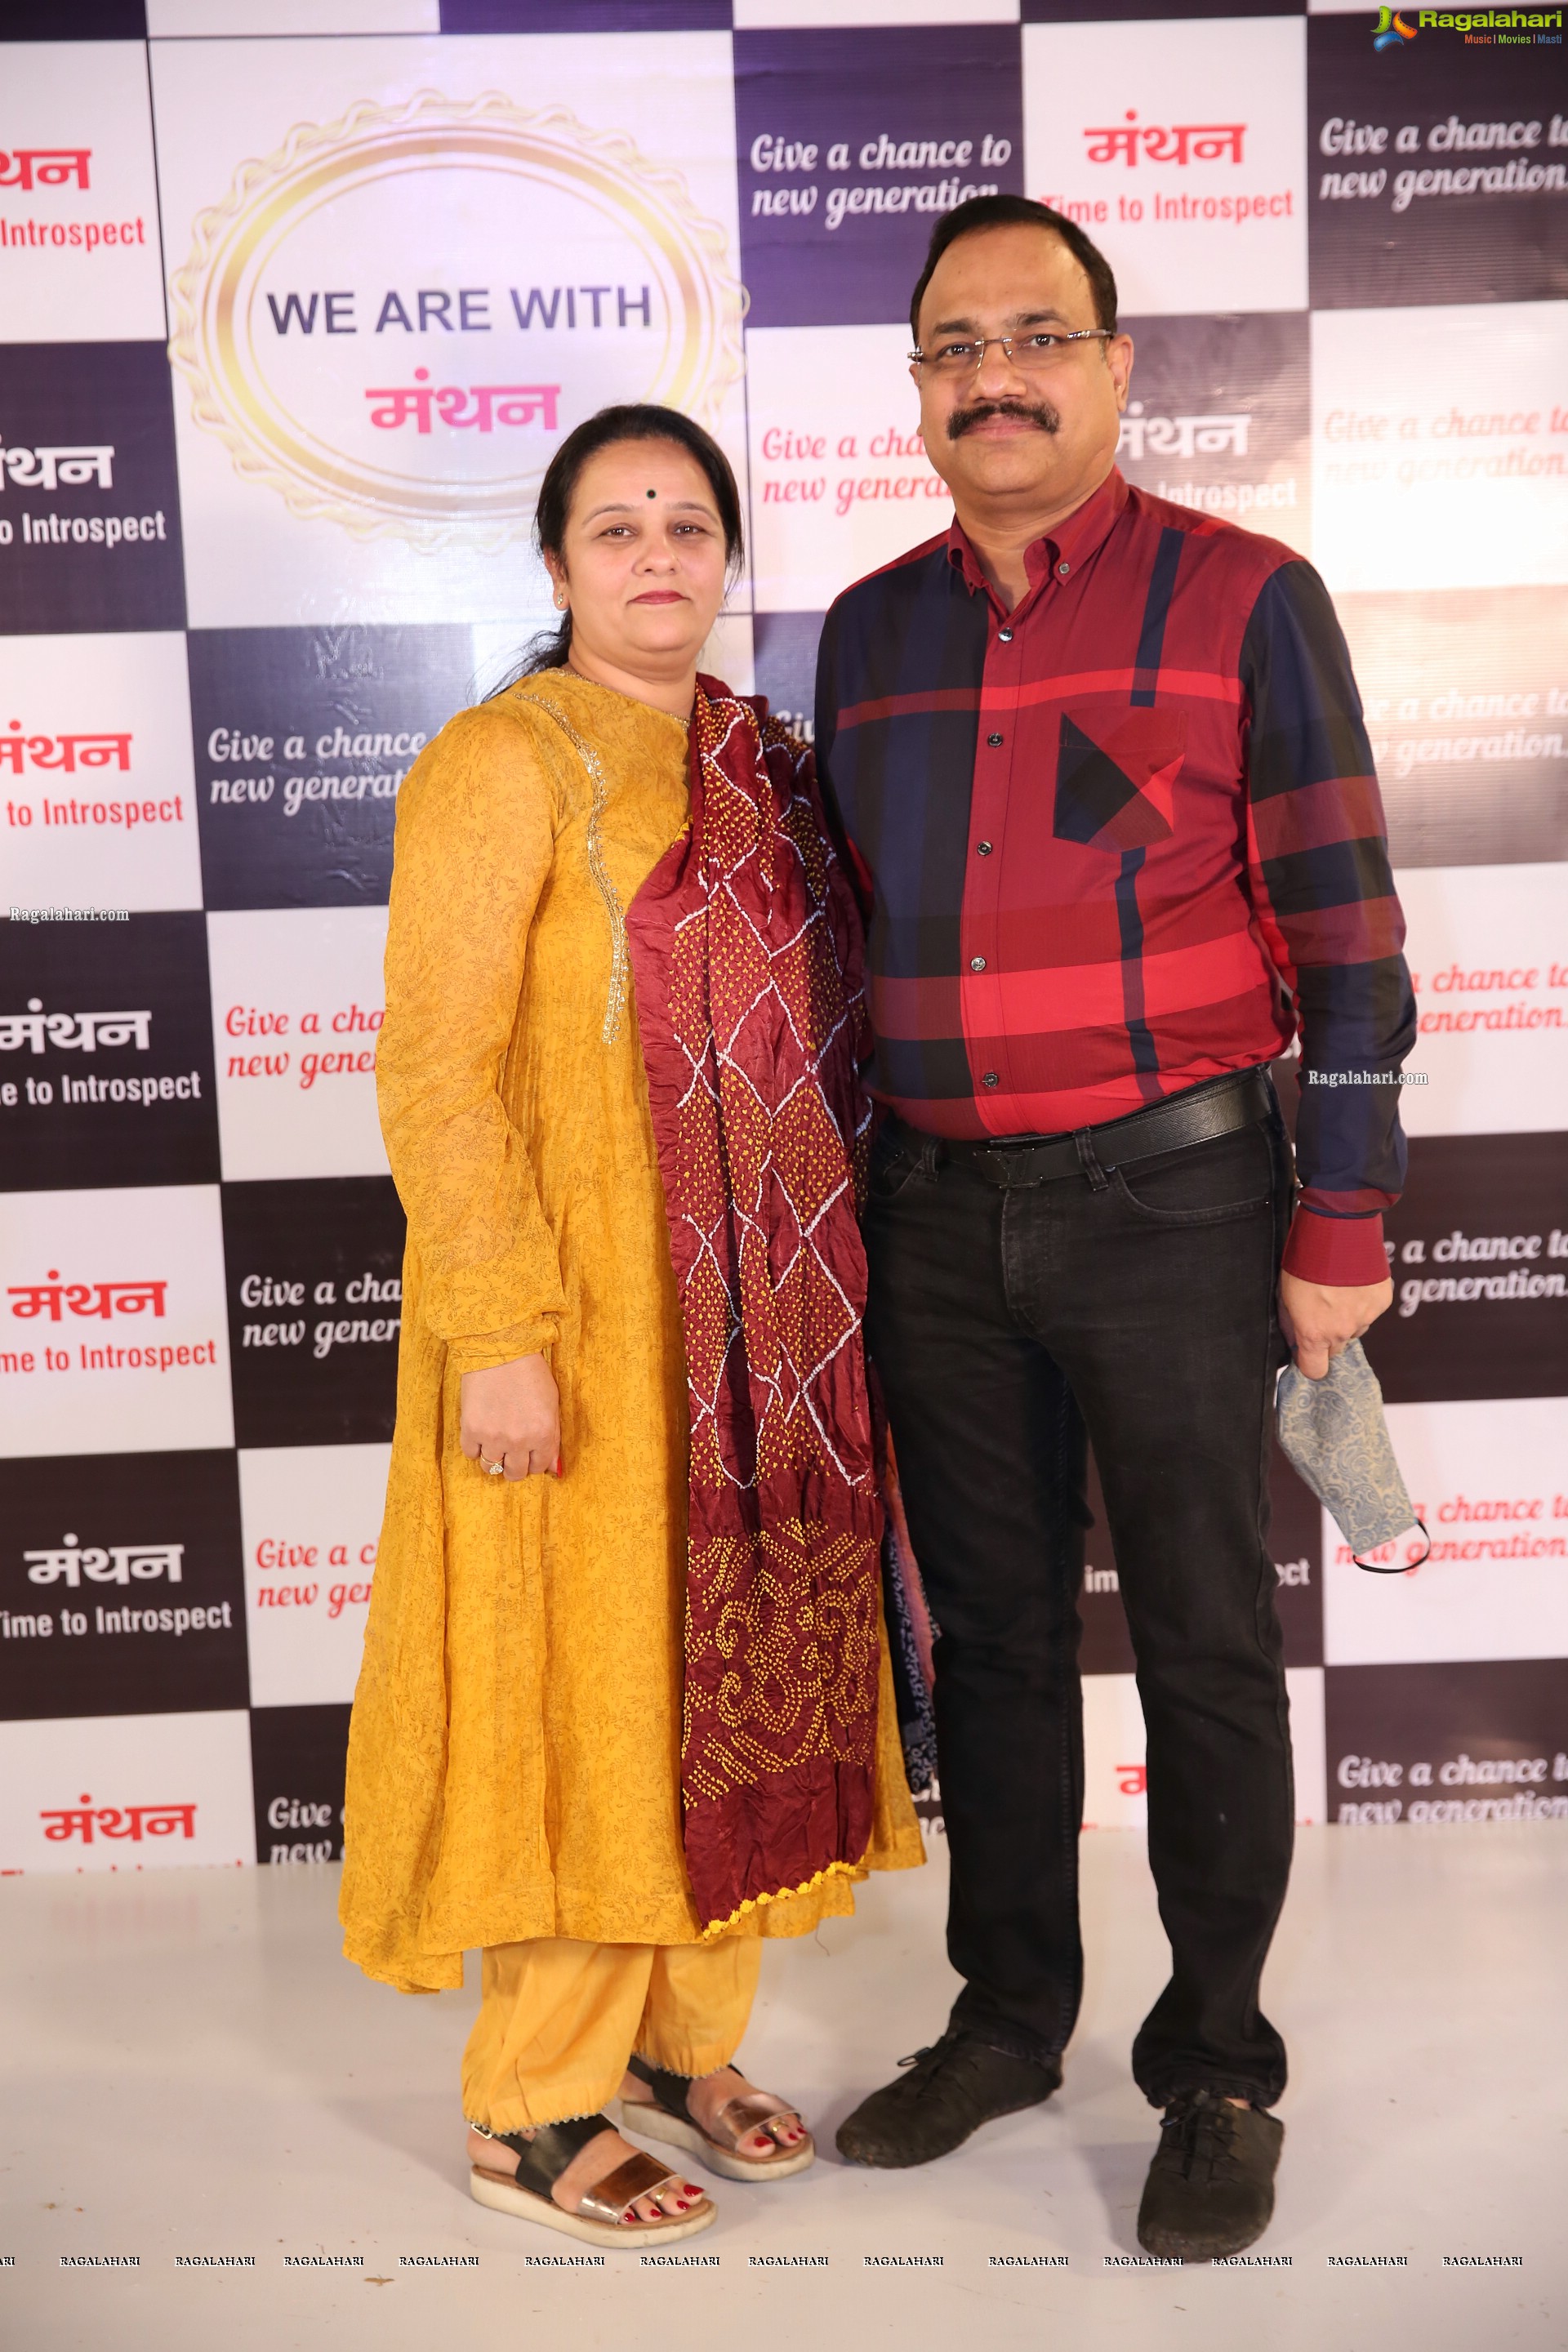 Team Manthan Celebrates New Year Party 2021 at Classic Gardens